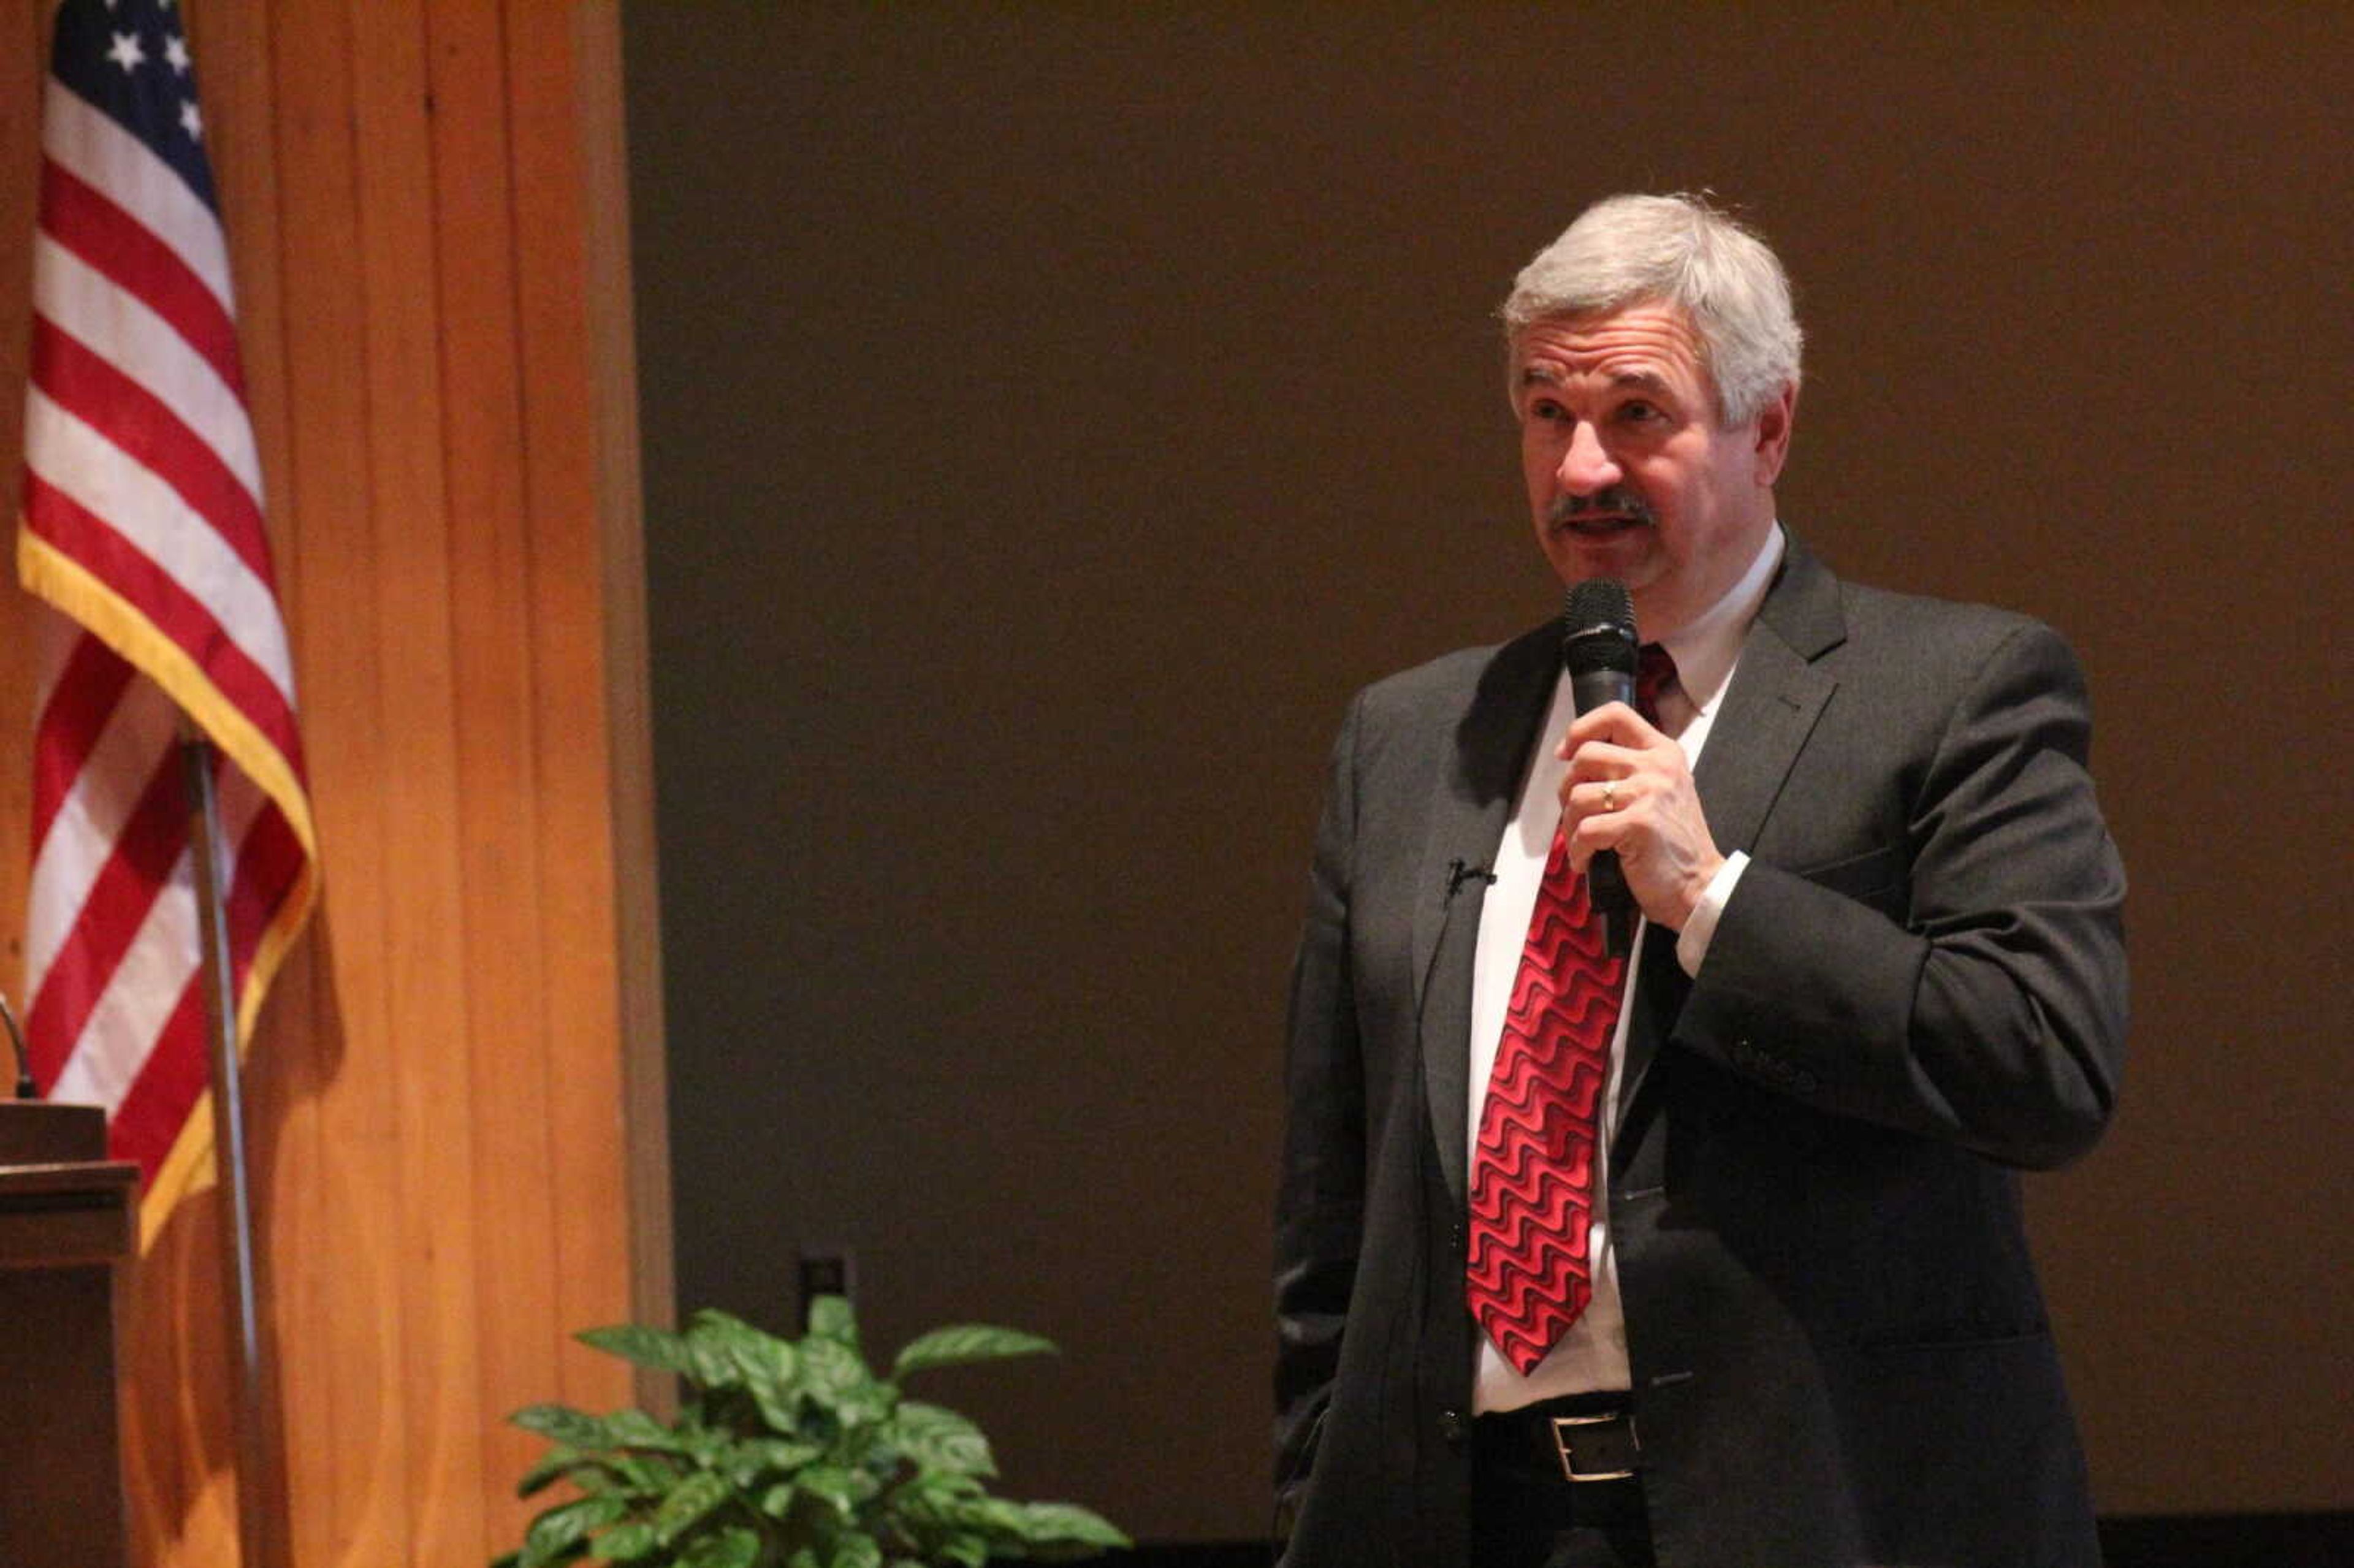 Dr. Paul D. Plotkowski spoke at 2:30 p.m. on Feb. 18 at the University Center Ballroom as part of his campus visit. Photo by Zarah Laurence